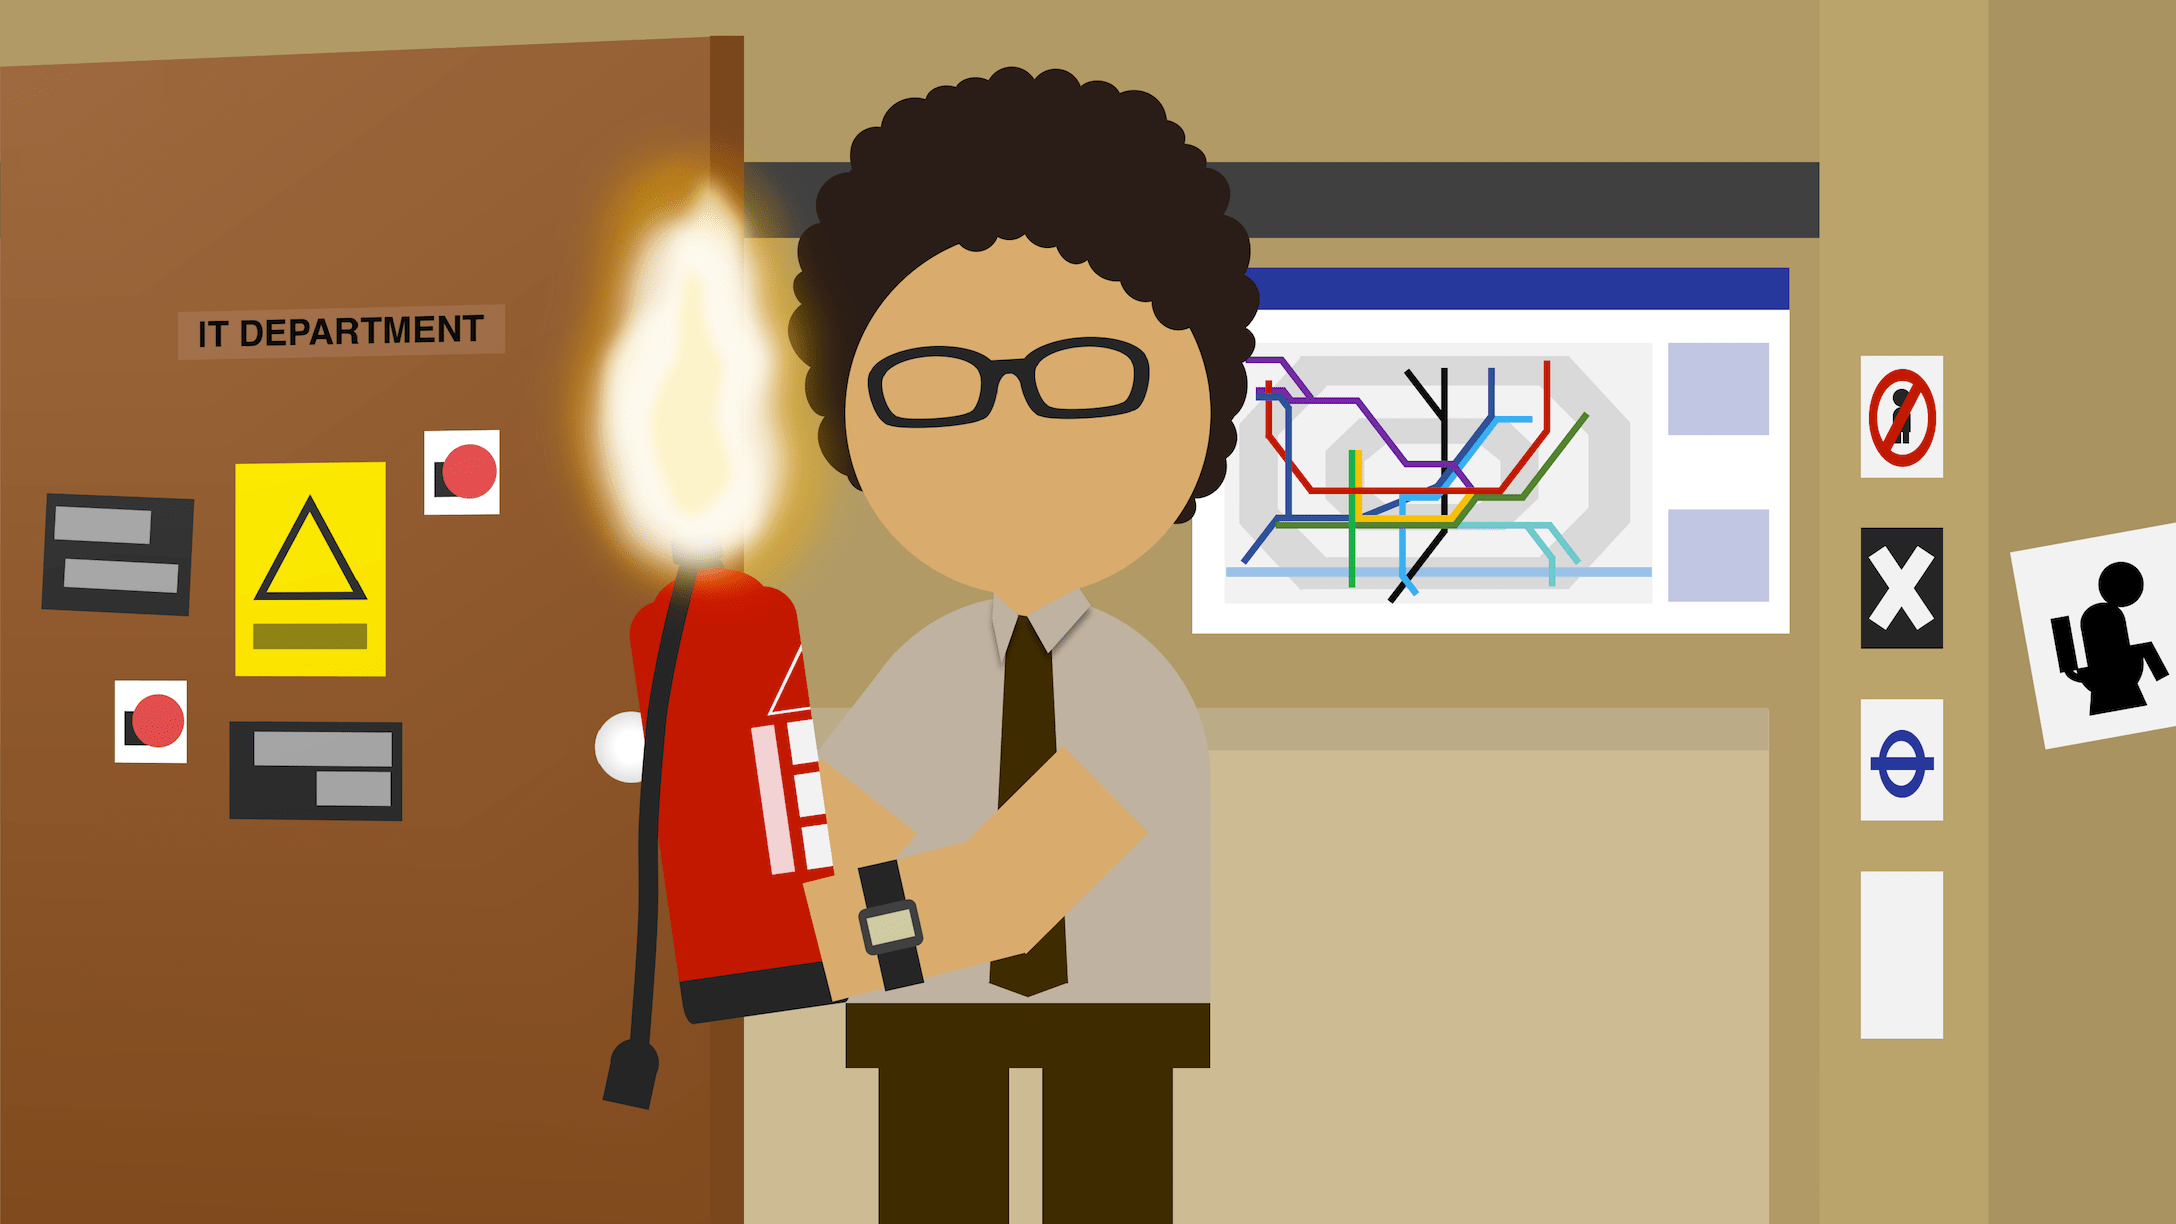 IT Crowd’s Moss awkwardly holds a fire extinguisher that’s on fire